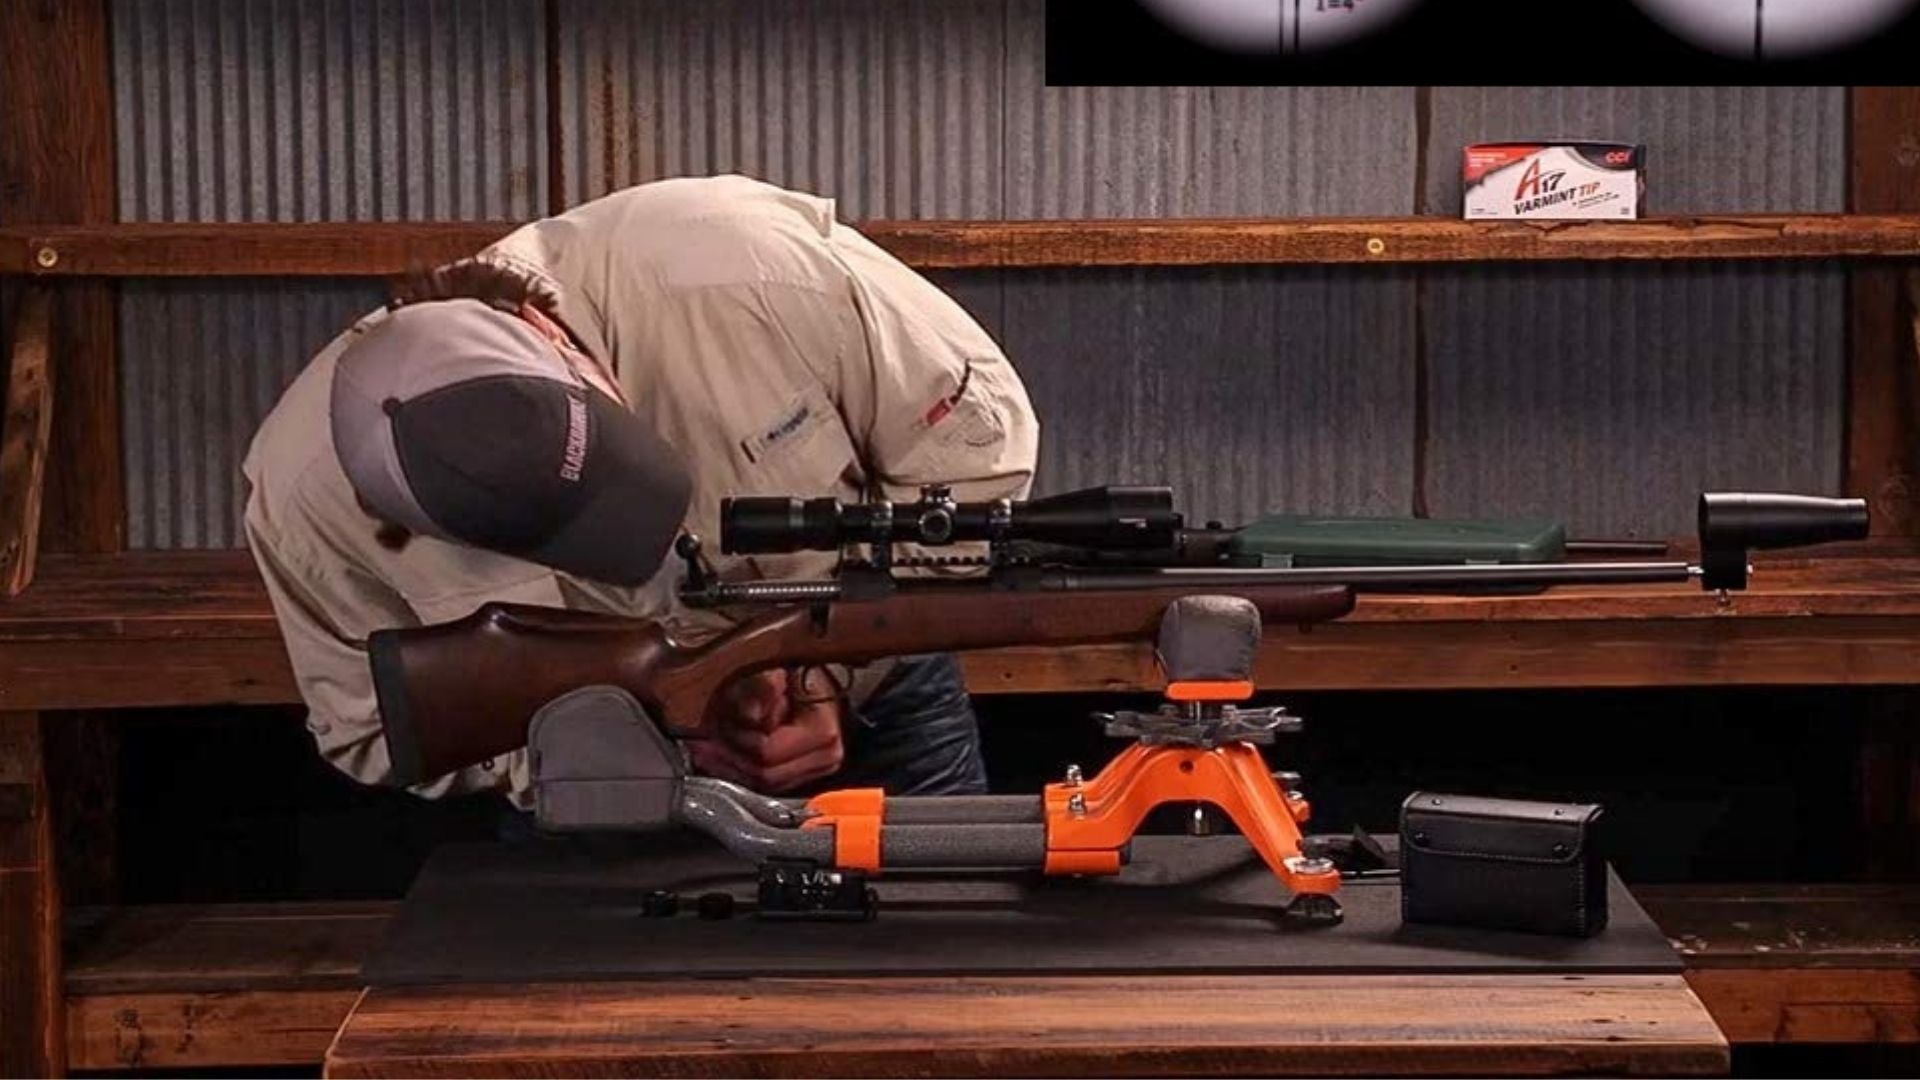 Sighting-in A Rifle Fundamentals Explained